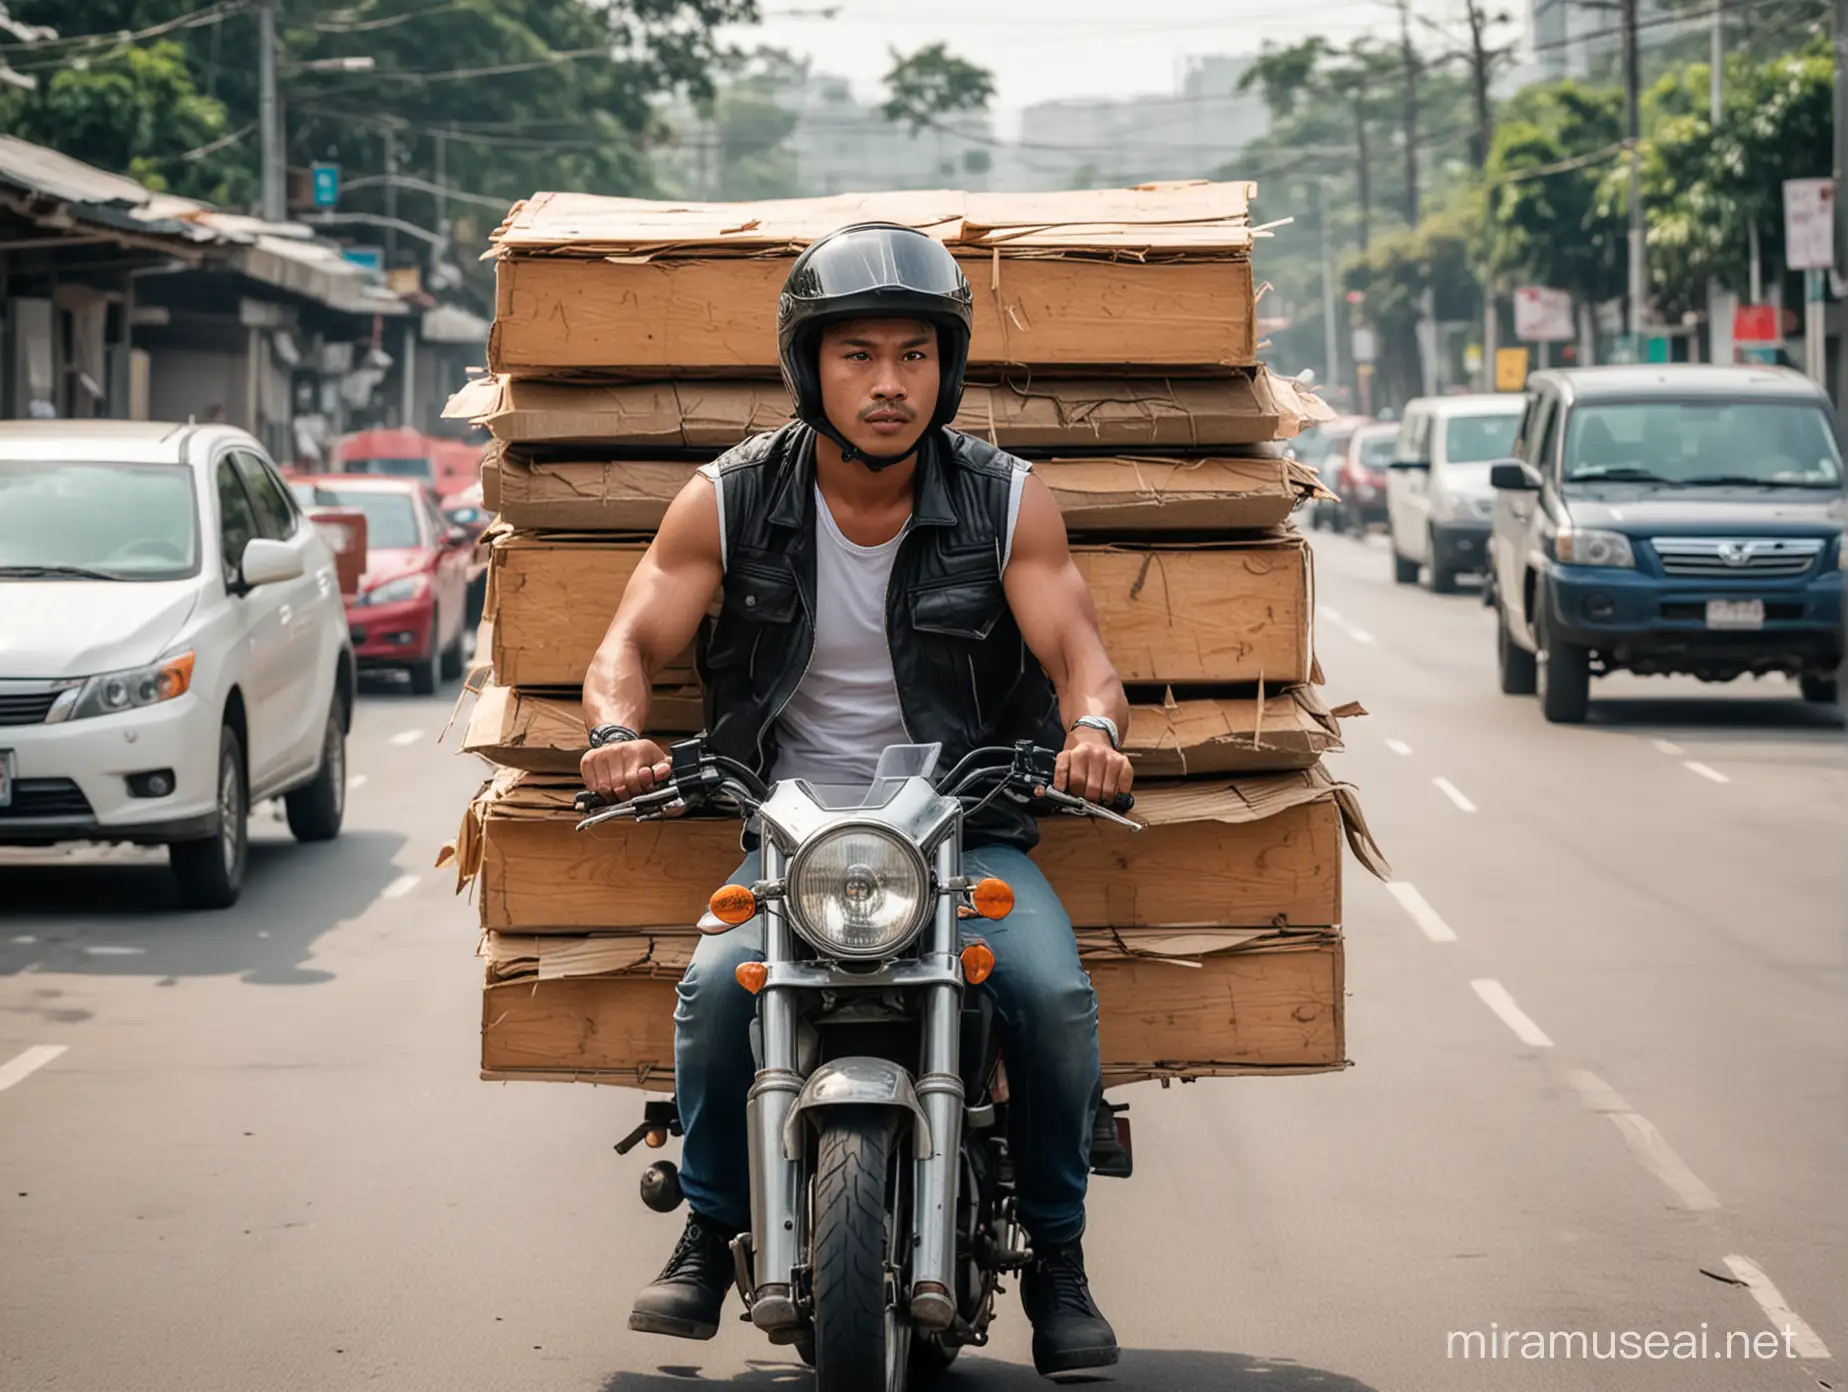 show a legit filipino motorcycle delivery rider with vest and helmet on wavering through traffic that is delivering plywood with cement stacked in the back of his motorcycle